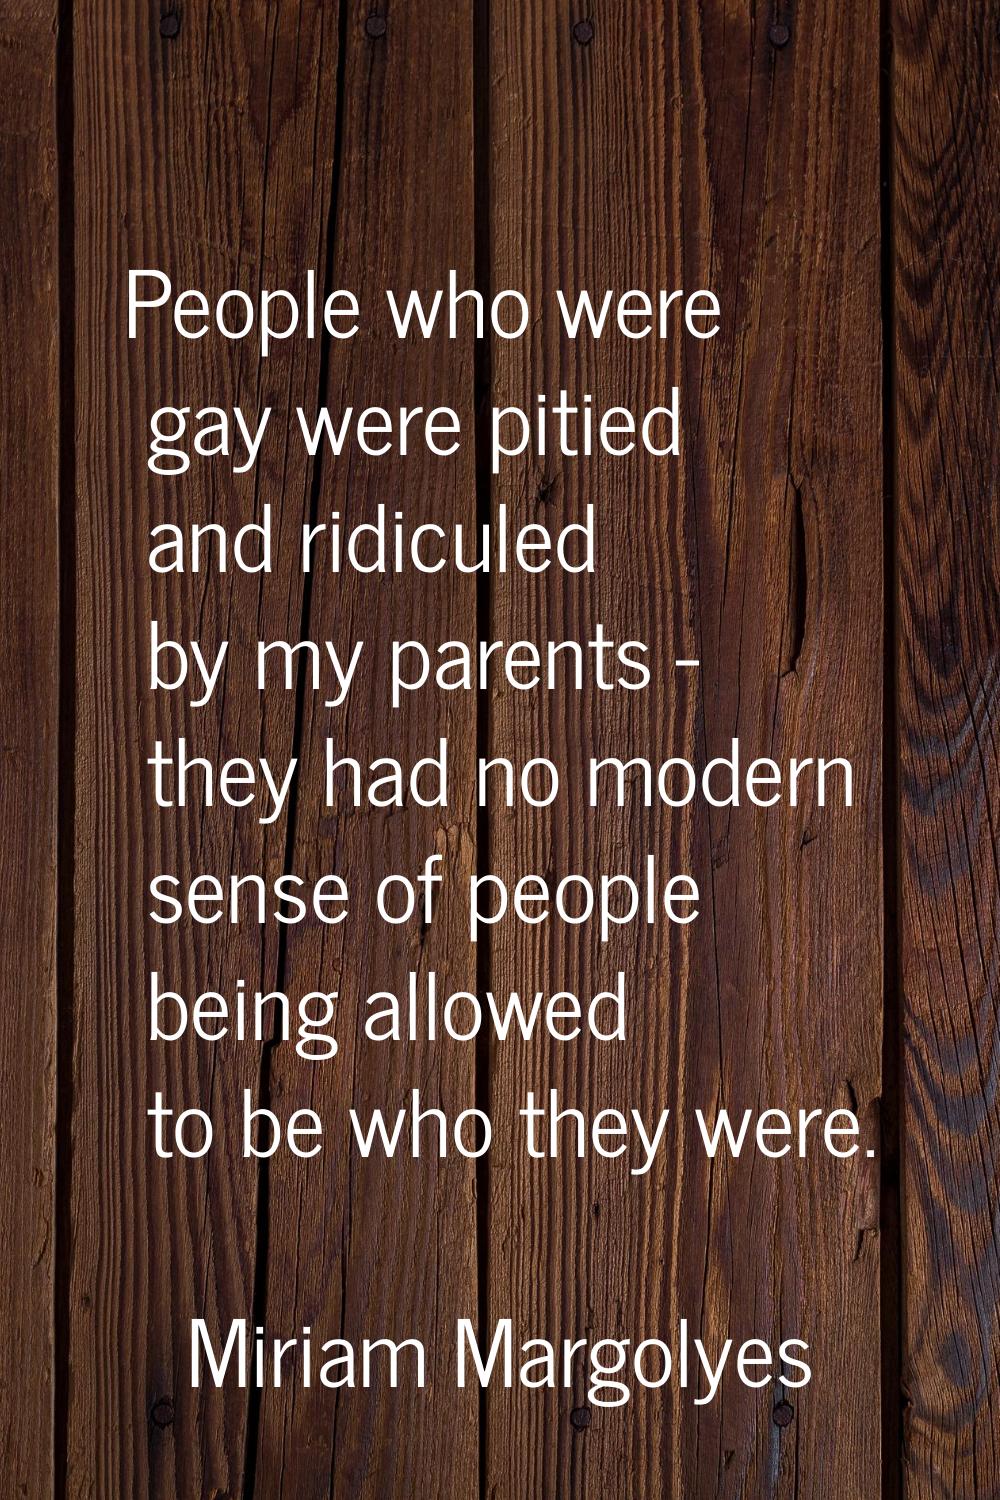 People who were gay were pitied and ridiculed by my parents - they had no modern sense of people be